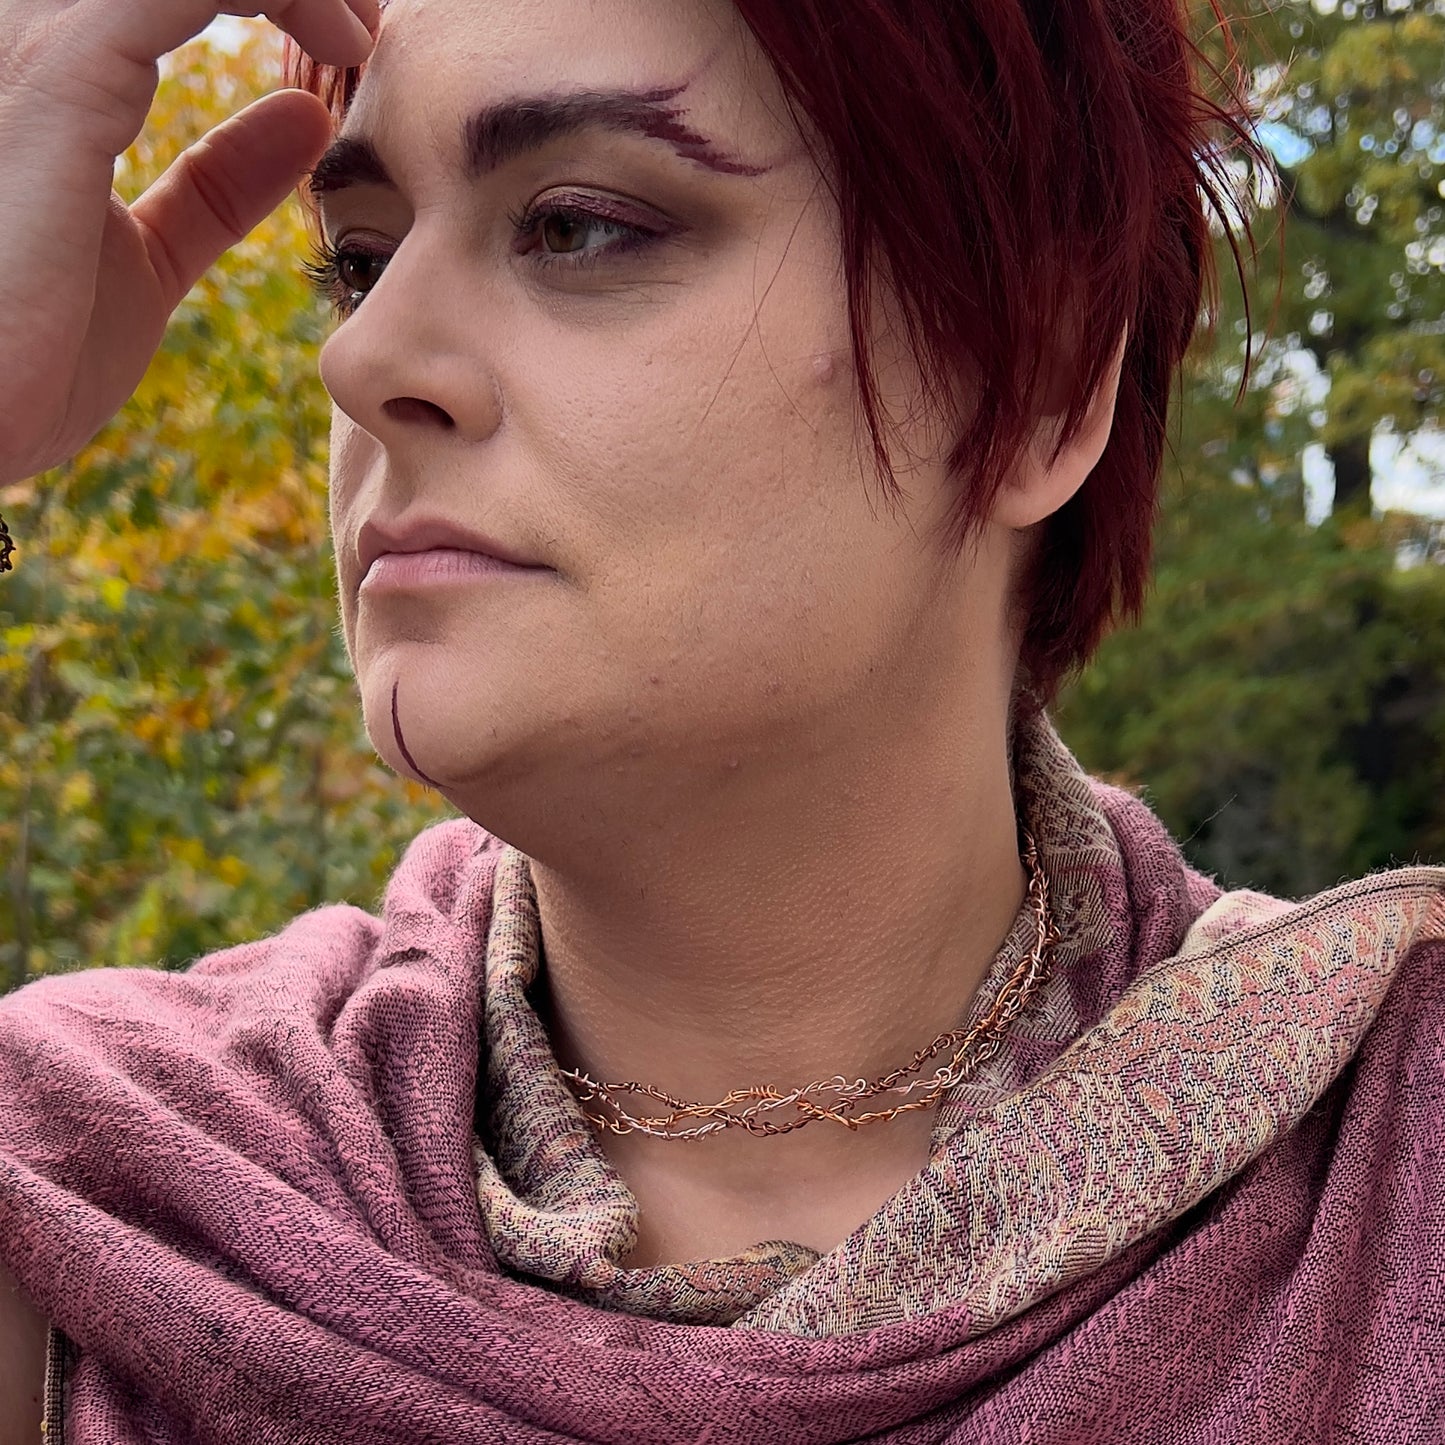 A light-skinned person with short red hair is wearing a mauve shawl and three neckvines braided together. They are pushing their hair out of their eyes.